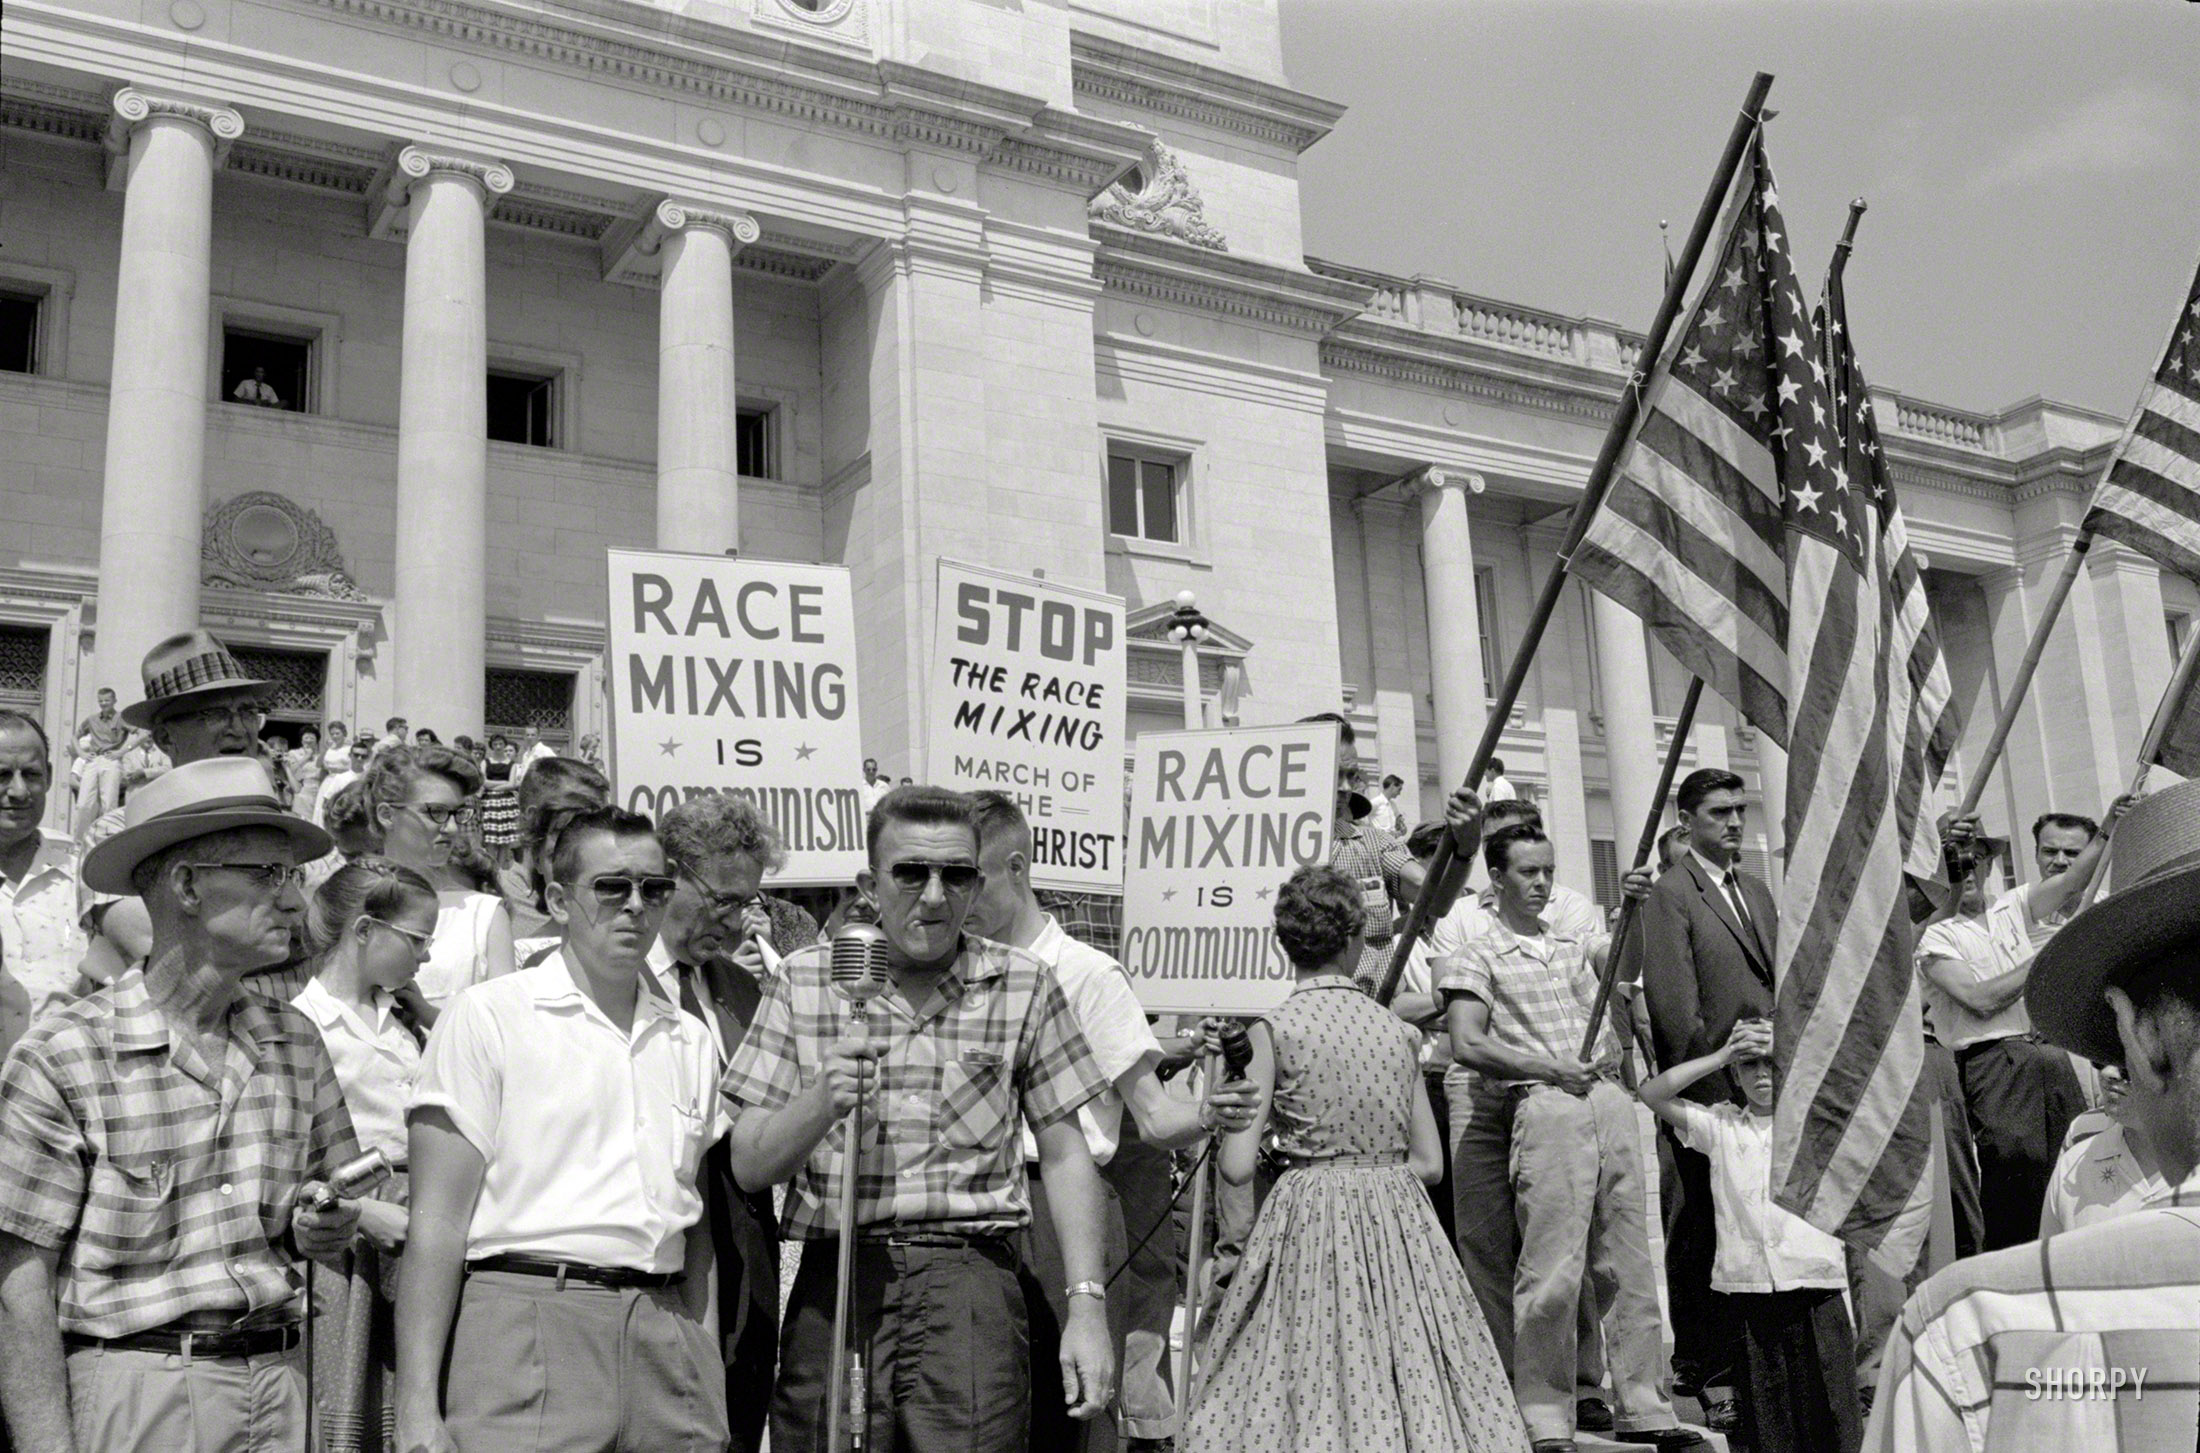 August 20, 1959. There was no Twitter in 1959, but you could carry a sign around. "Little Rock, Arkansas. Rally at State Capitol. Group protesting admission of the 'Little Rock Nine' to Central High School." Photo by John T. Bledsoe. U.S. News & World Report Photograph Collection, Library of Congress. View full size.